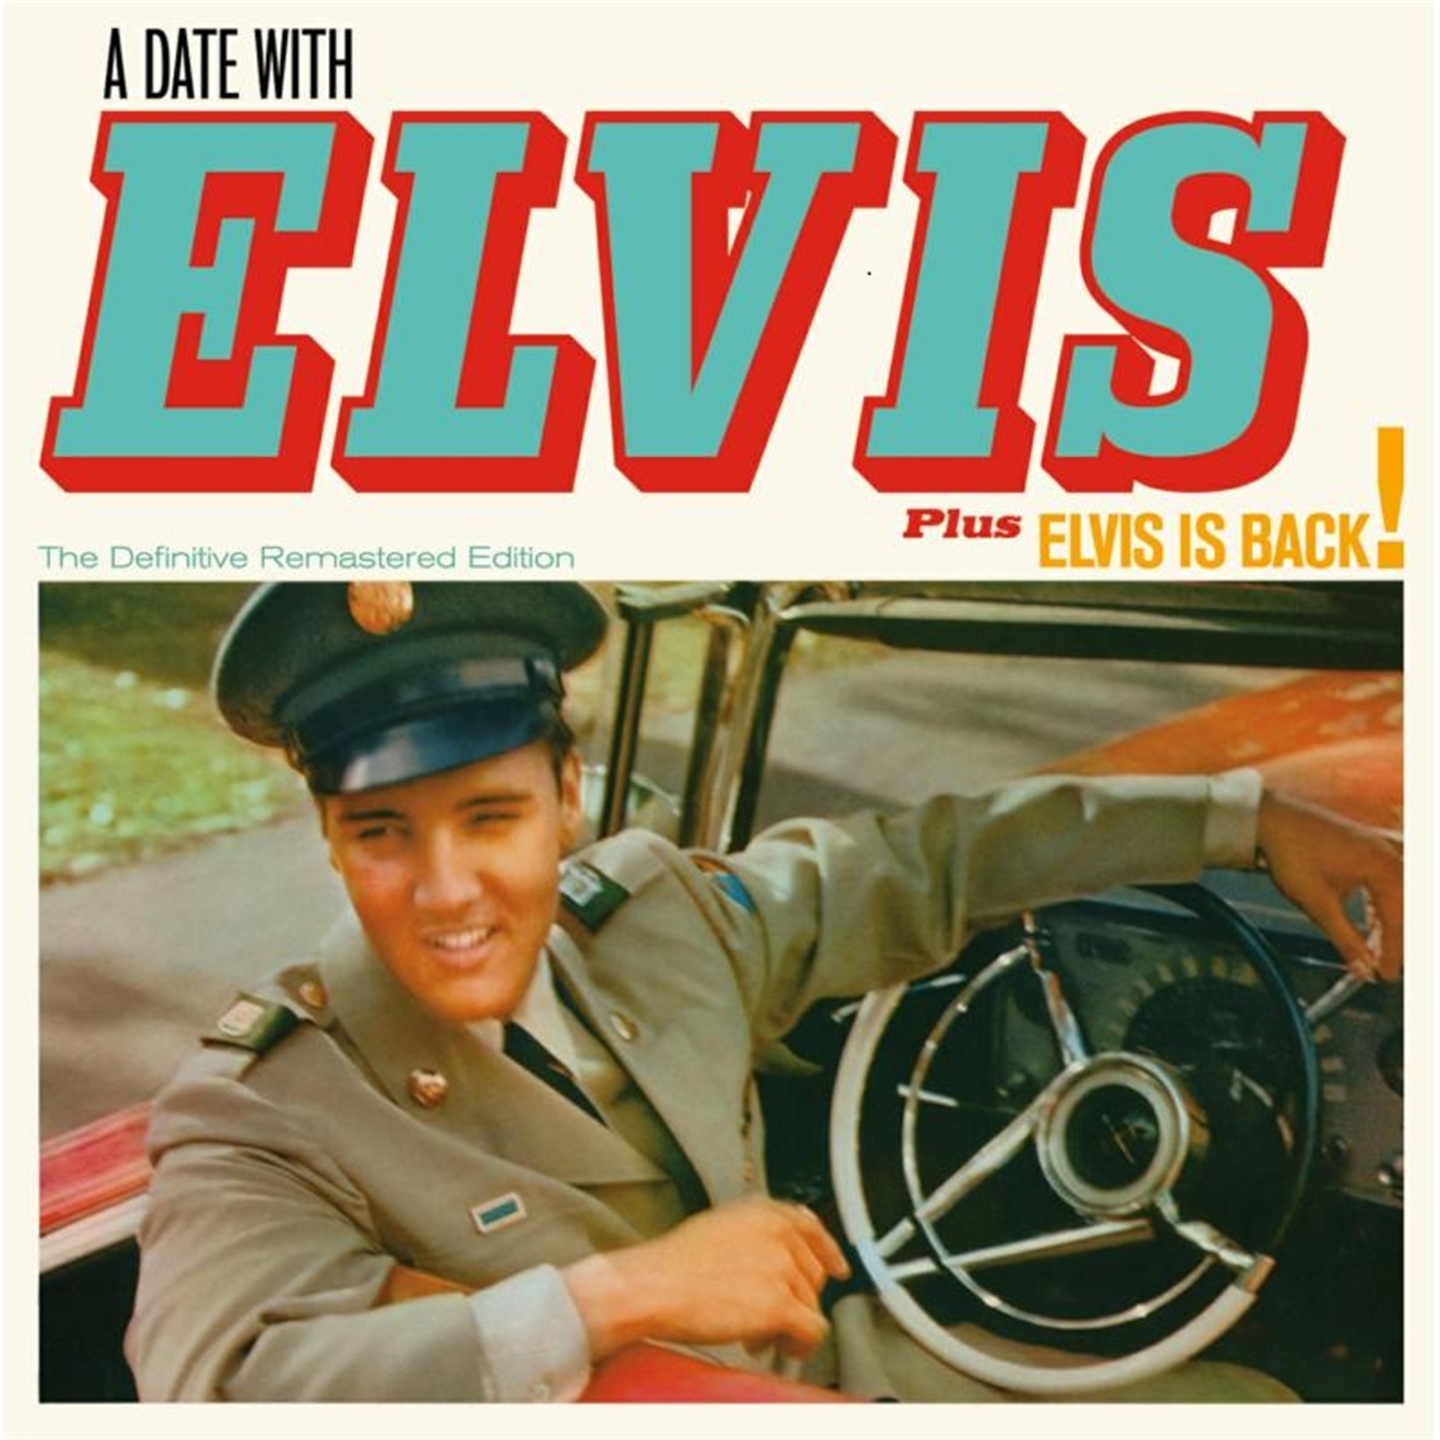 A DATE WITH ELVIS + ELVIS IS BACK!